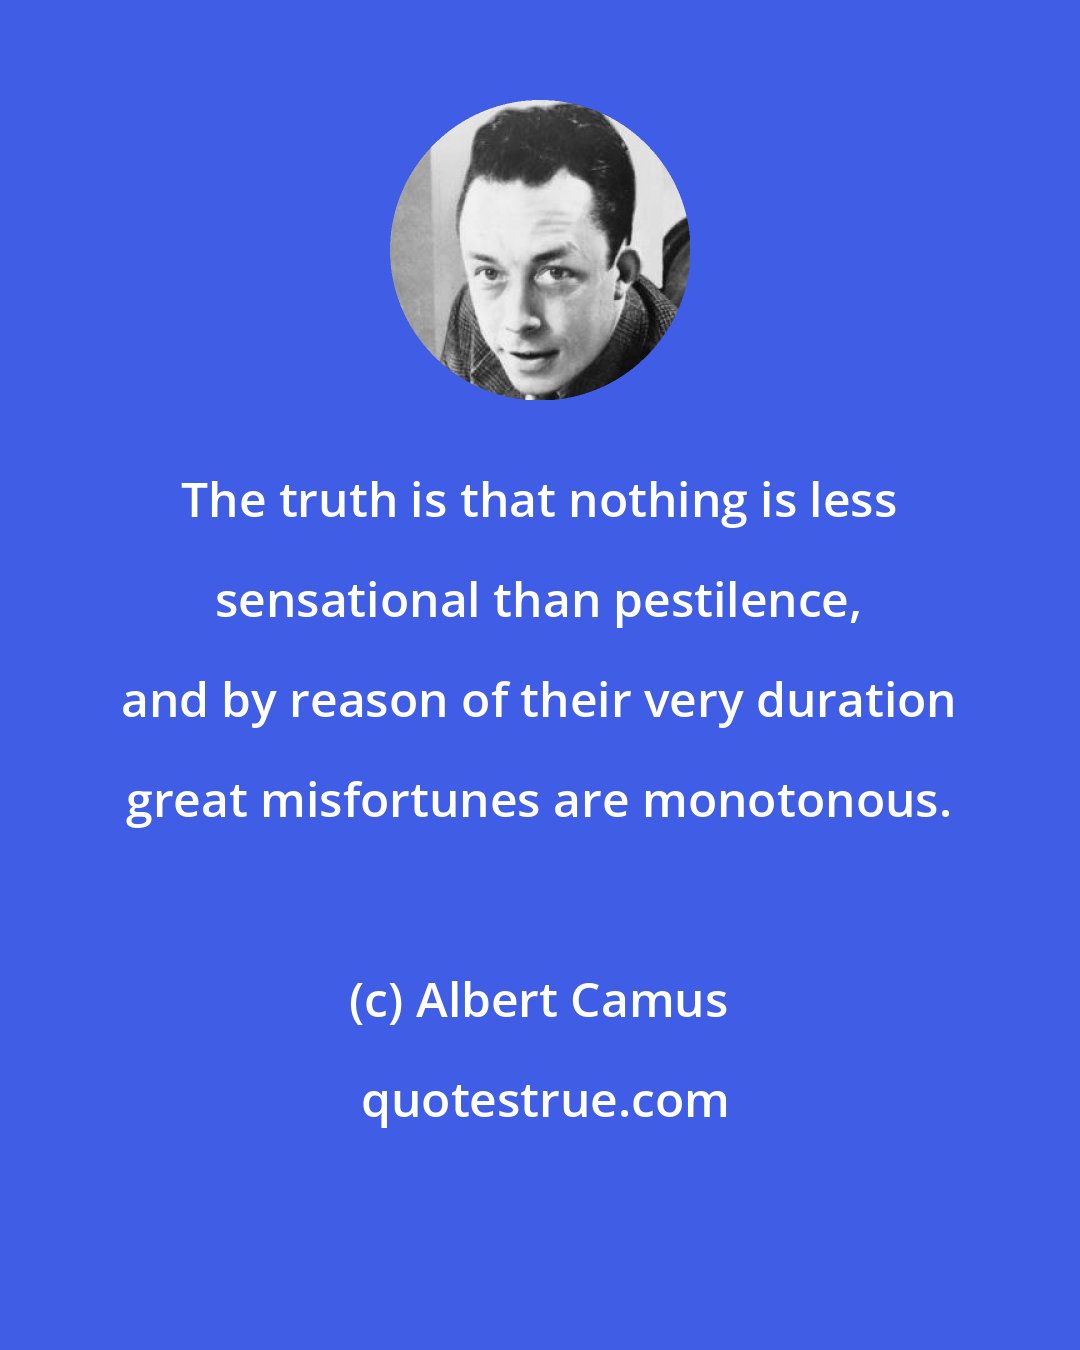 Albert Camus: The truth is that nothing is less sensational than pestilence, and by reason of their very duration great misfortunes are monotonous.